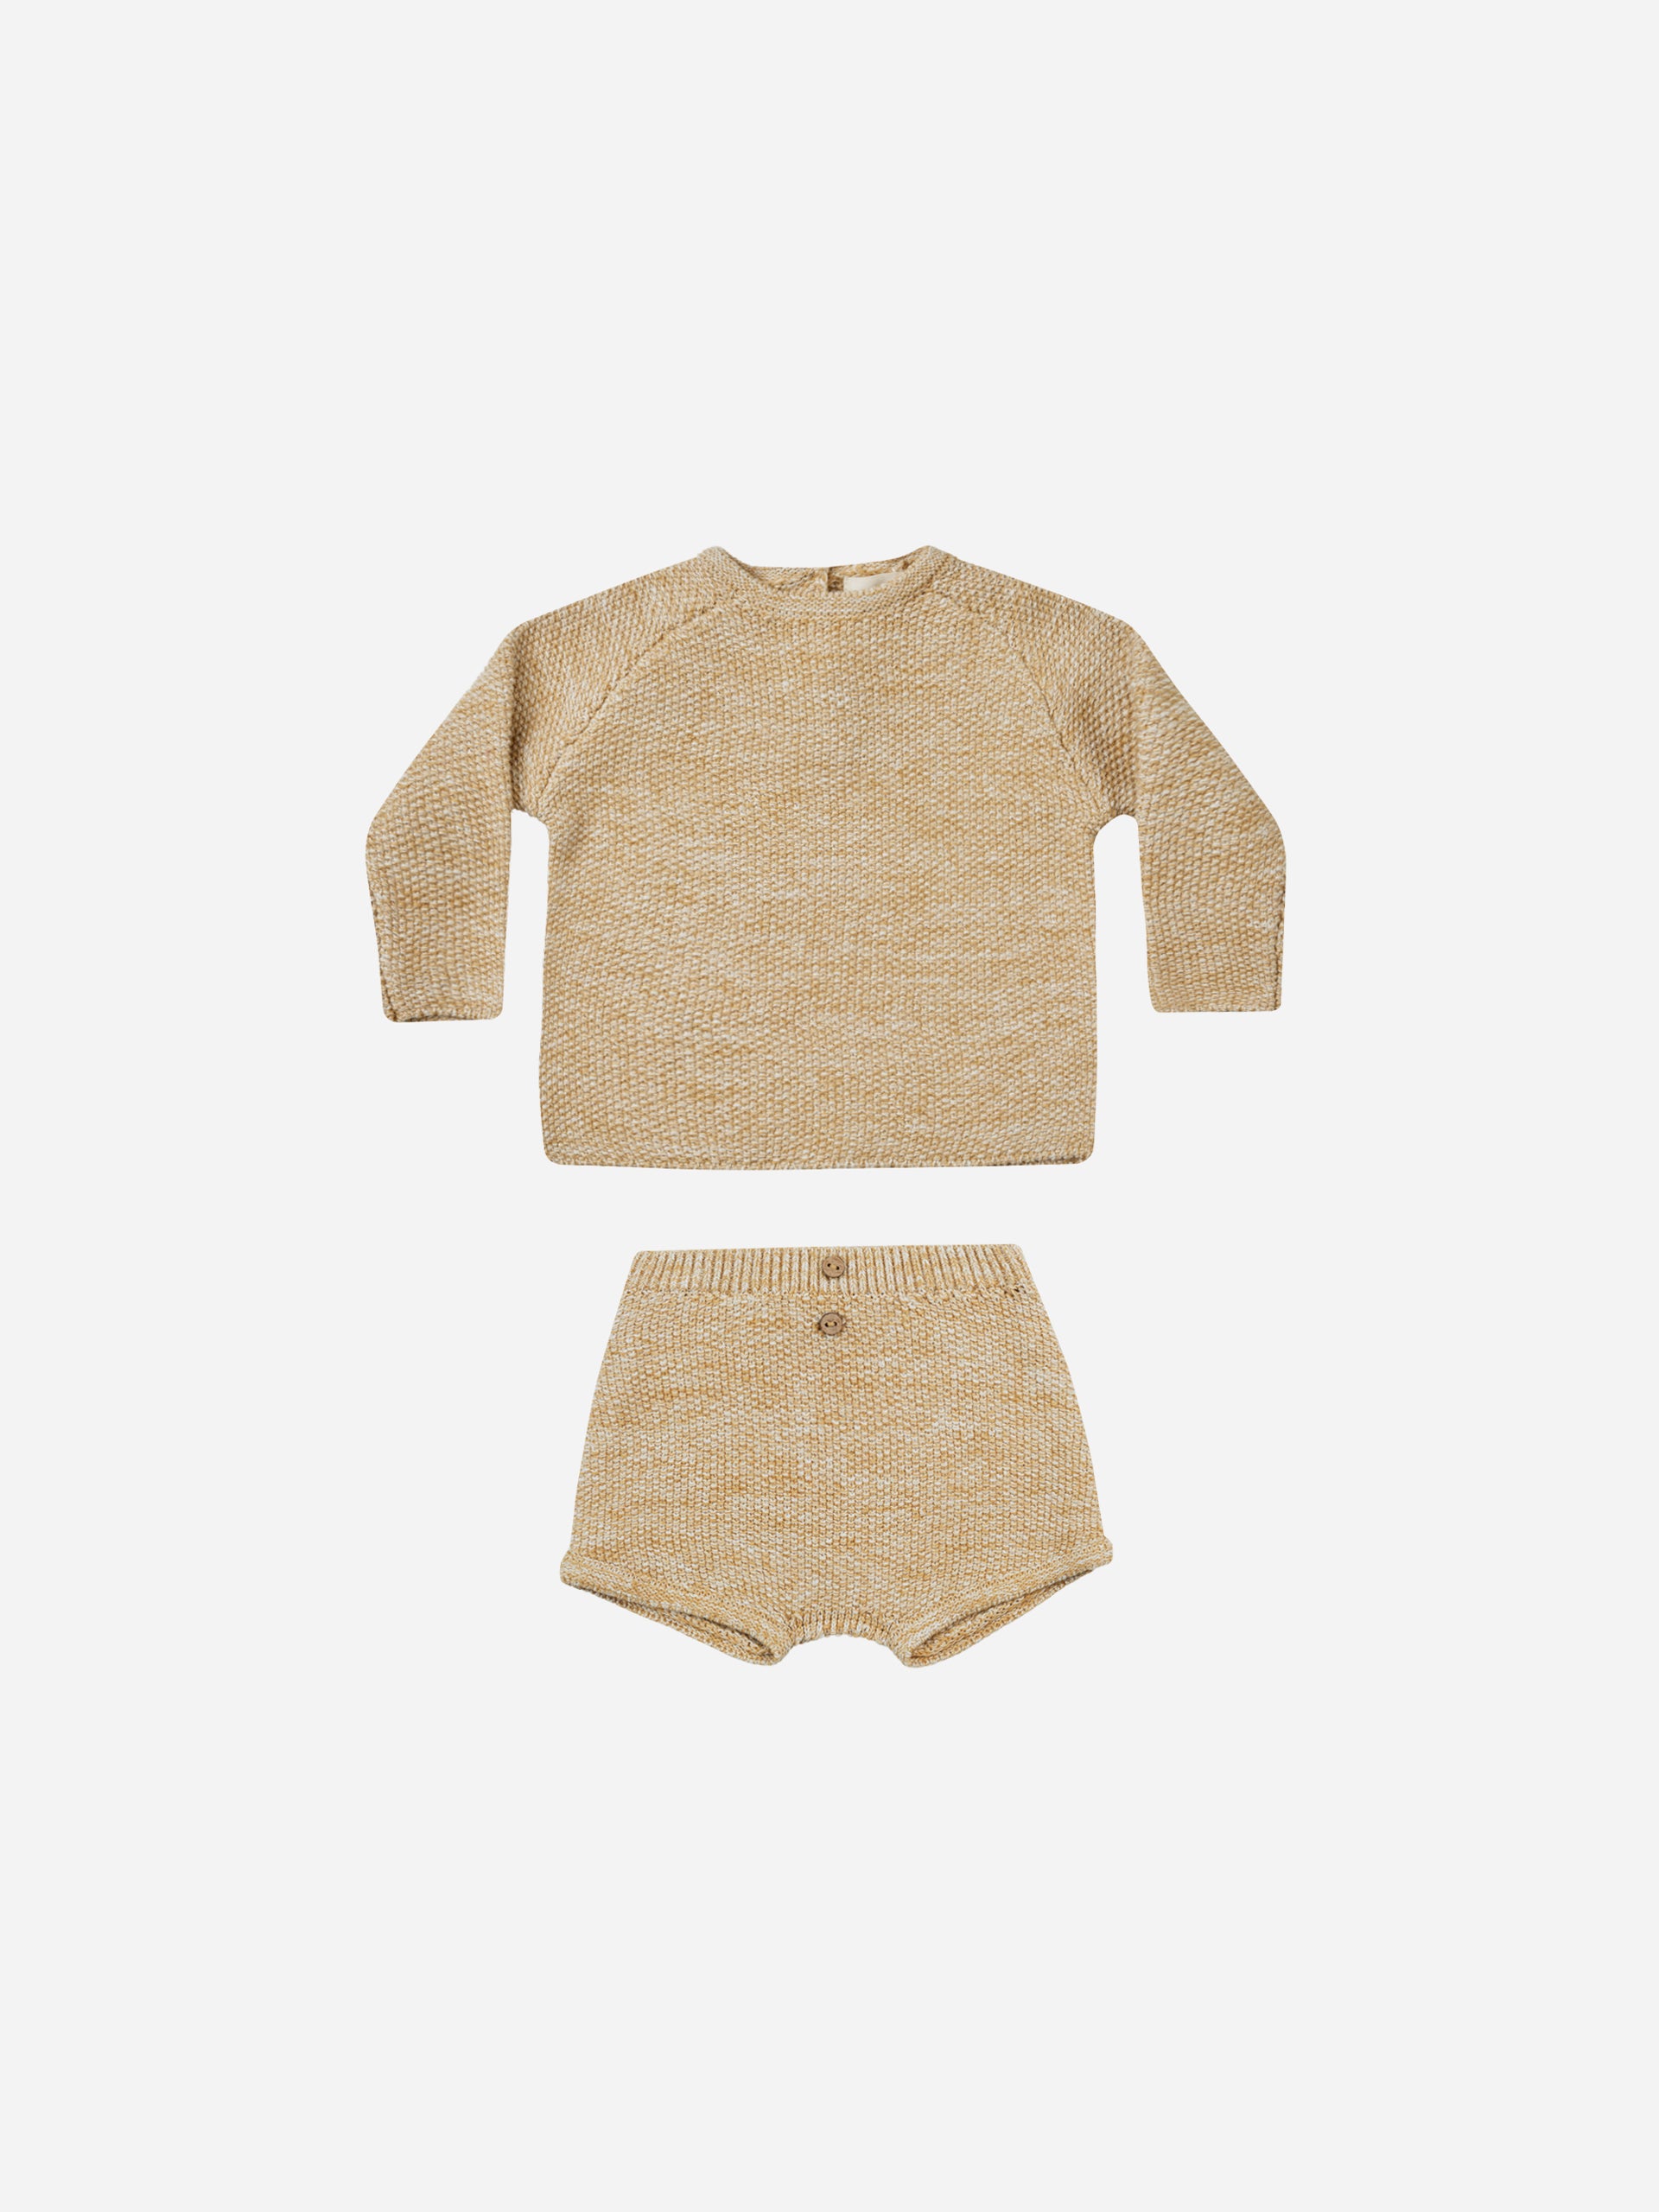 Summer Knit Set || Heathered Honey - Rylee + Cru | Kids Clothes | Trendy Baby Clothes | Modern Infant Outfits |